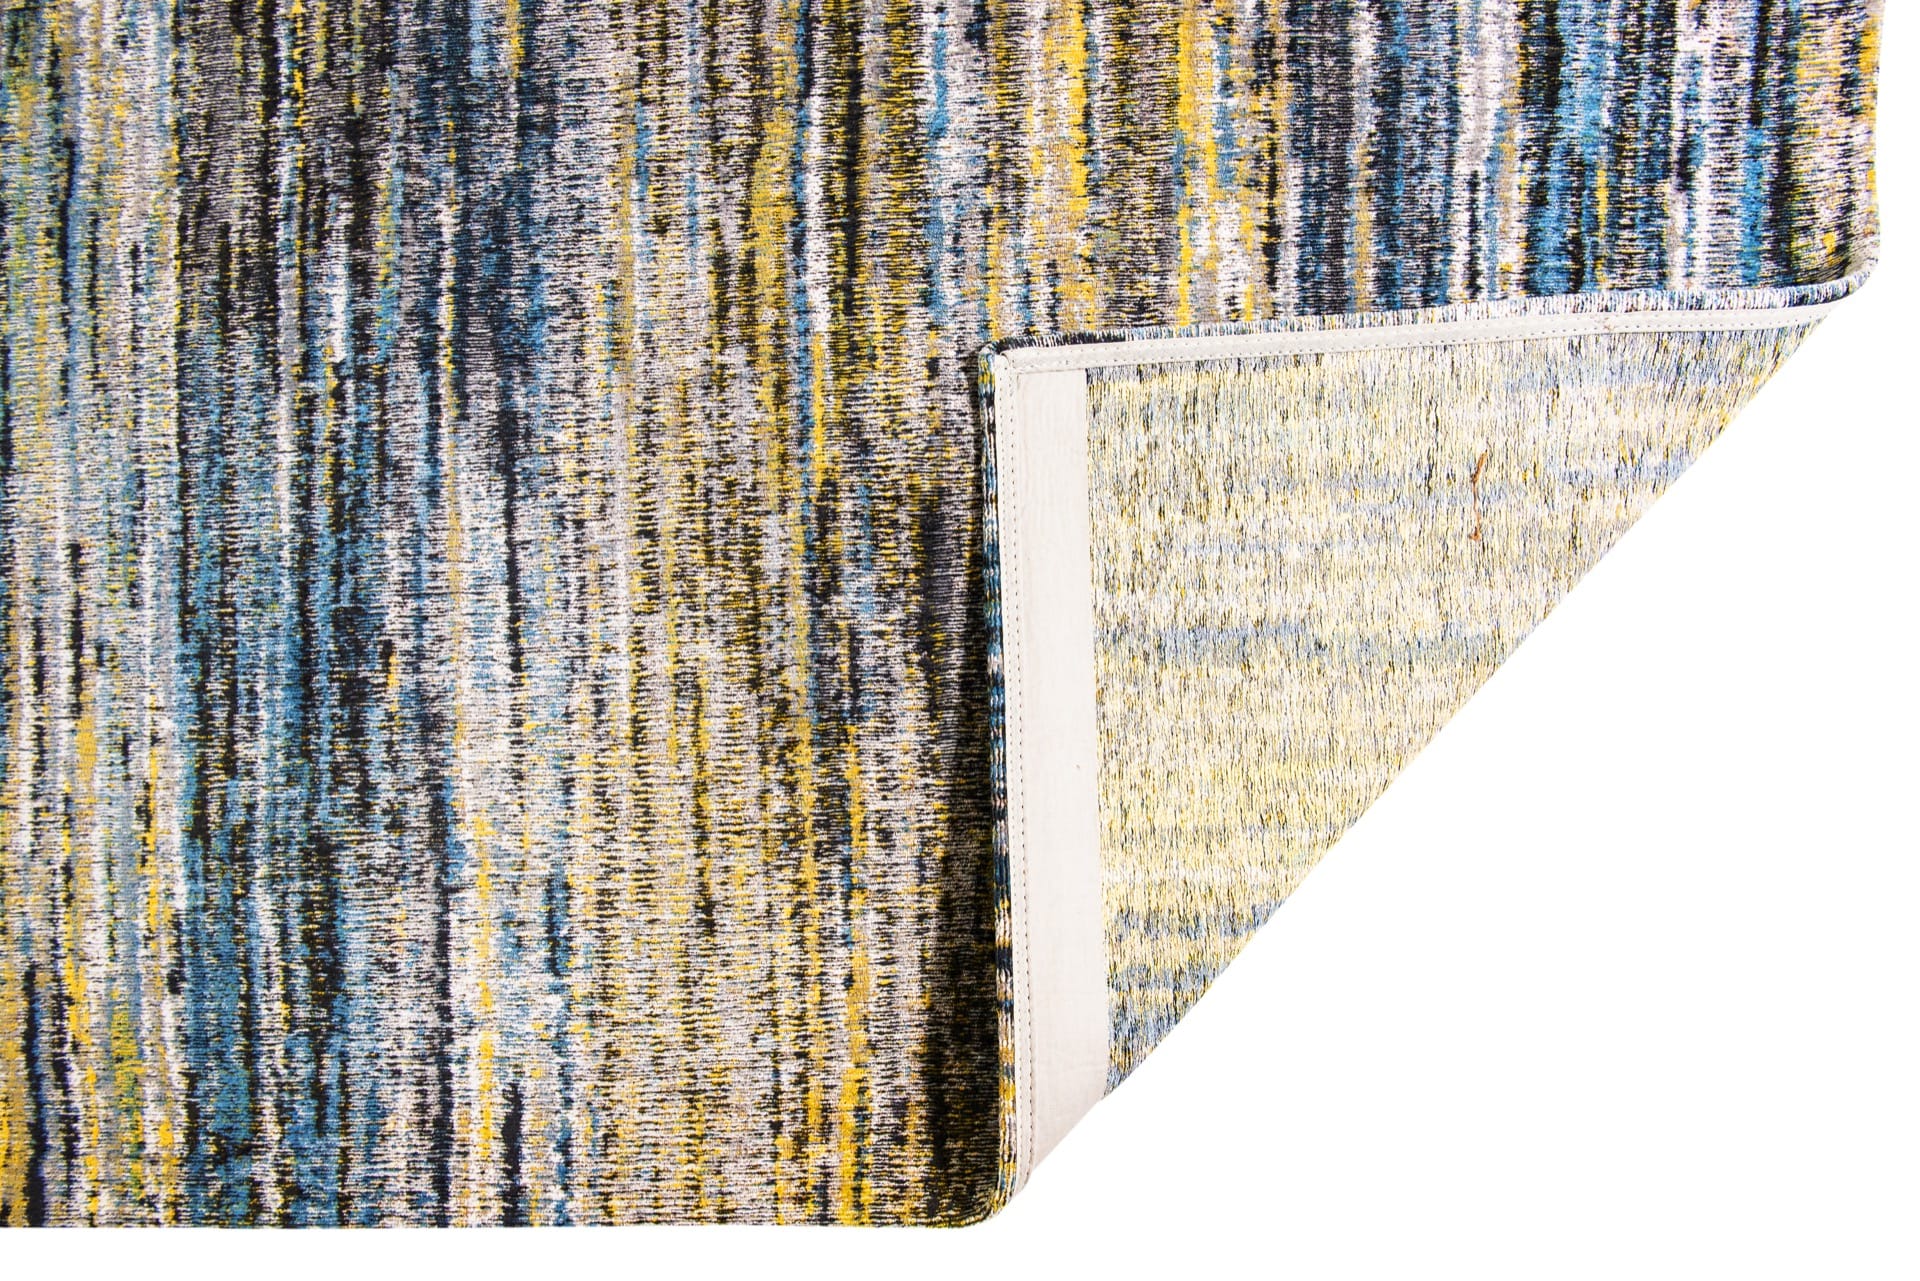 Sari Collection Blue Yellow Mix 8873 rug by Louis De Poortere